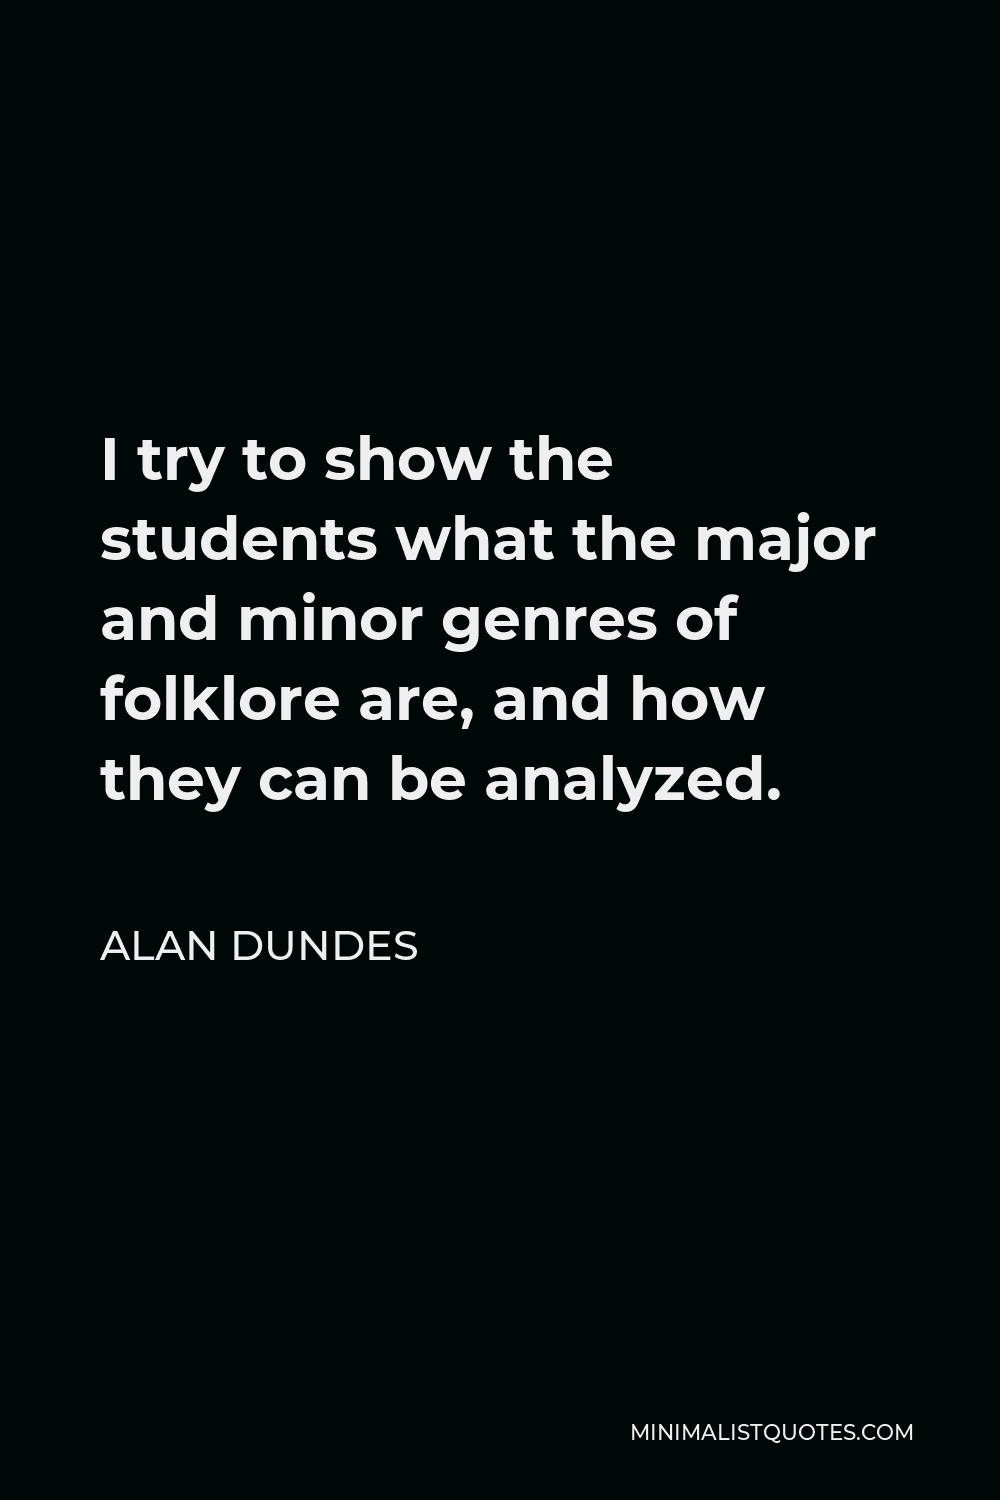 Alan Dundes Quote - I try to show the students what the major and minor genres of folklore are, and how they can be analyzed.